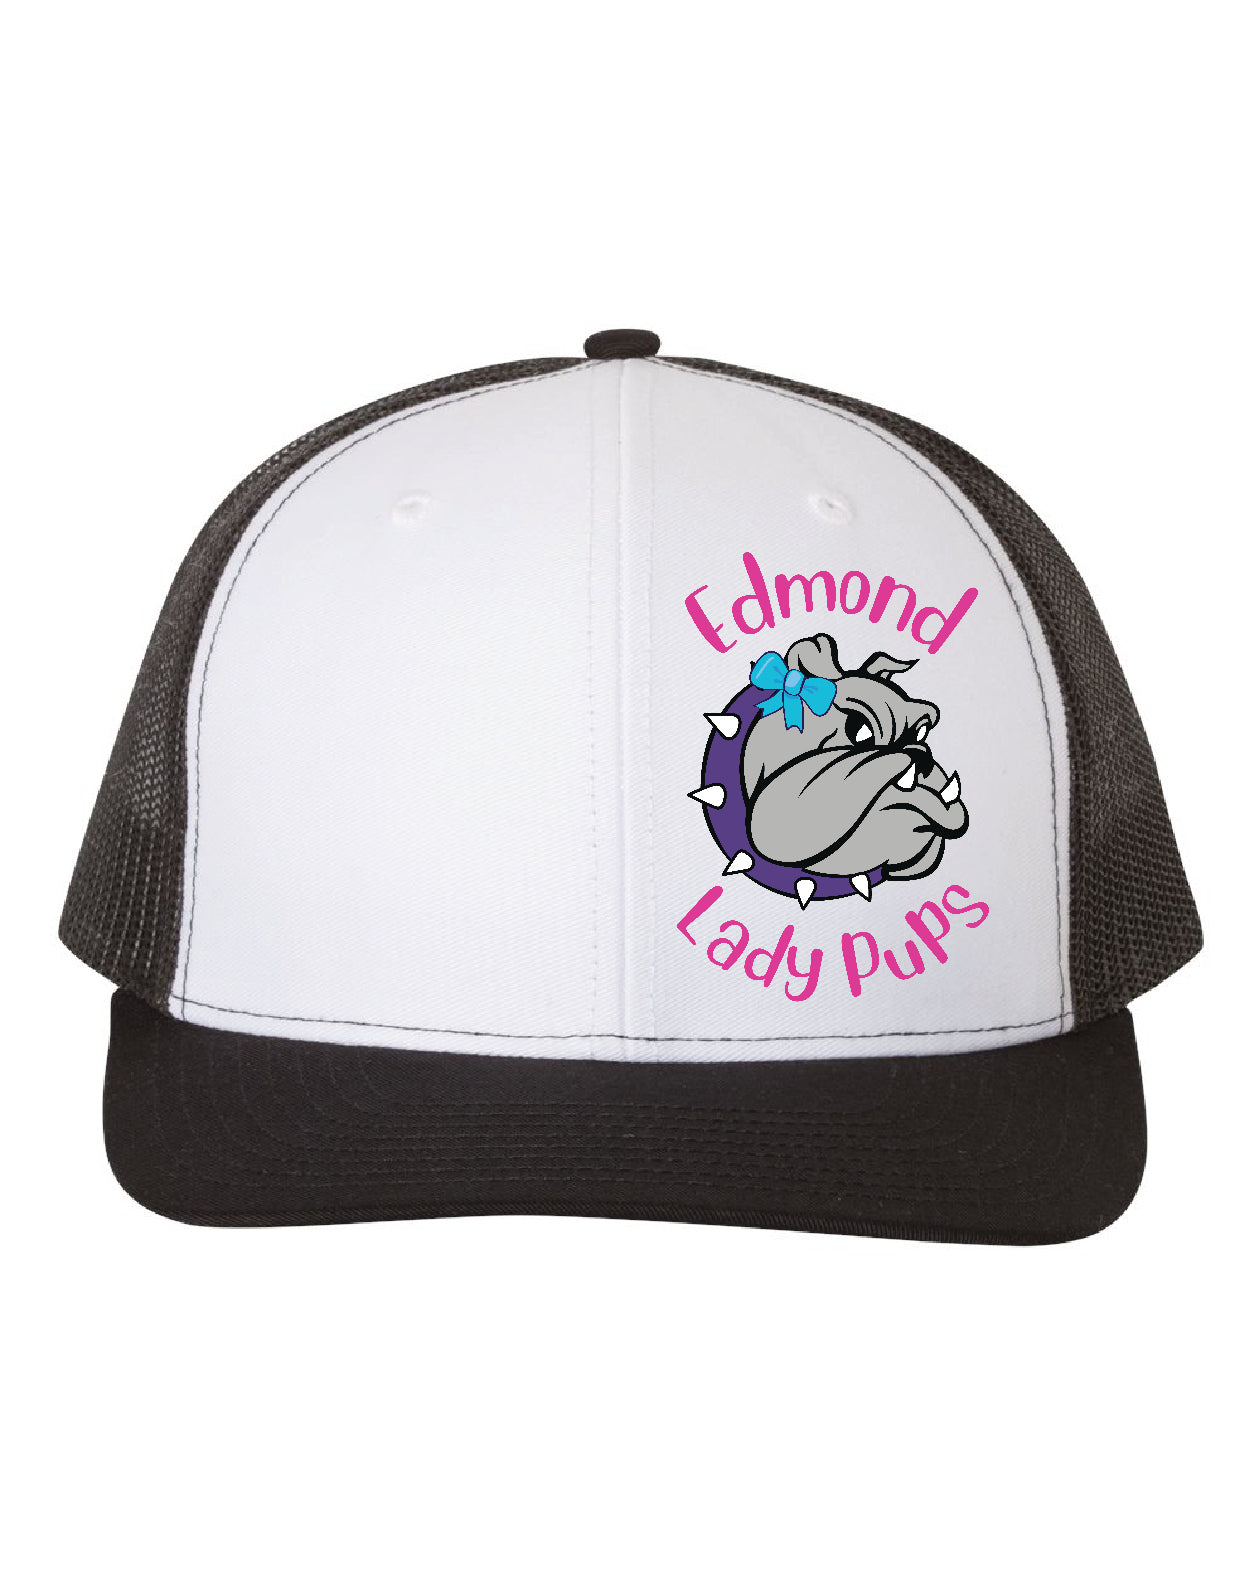 Edmond Lady Pups Embroidered Hat